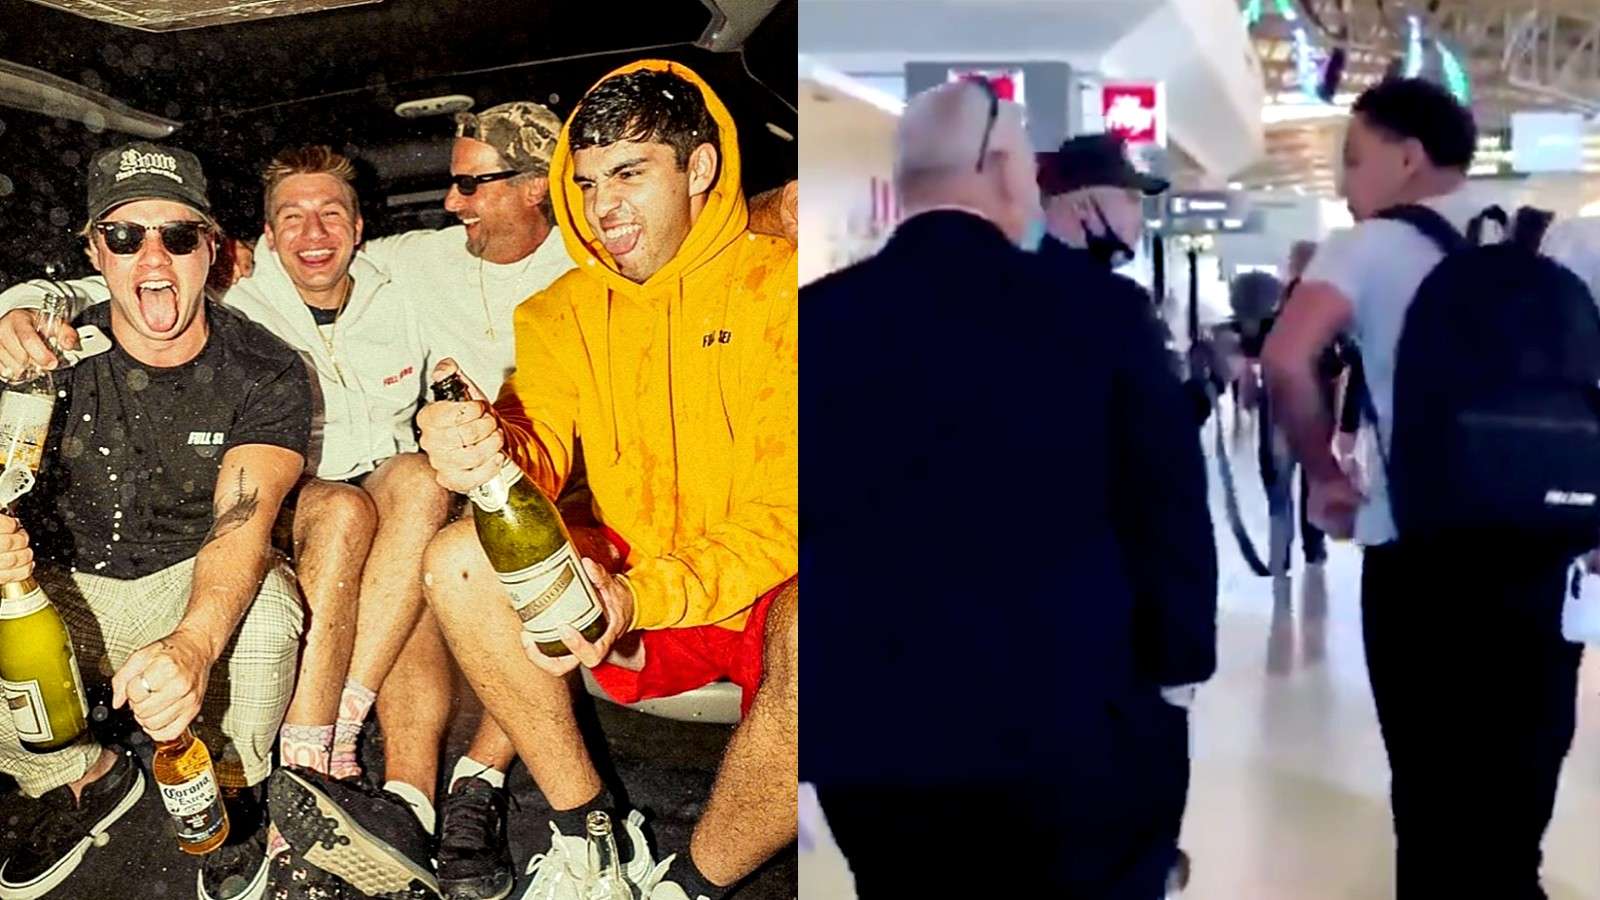 Image of the NELK boys next to image of them being apprehended by secret service